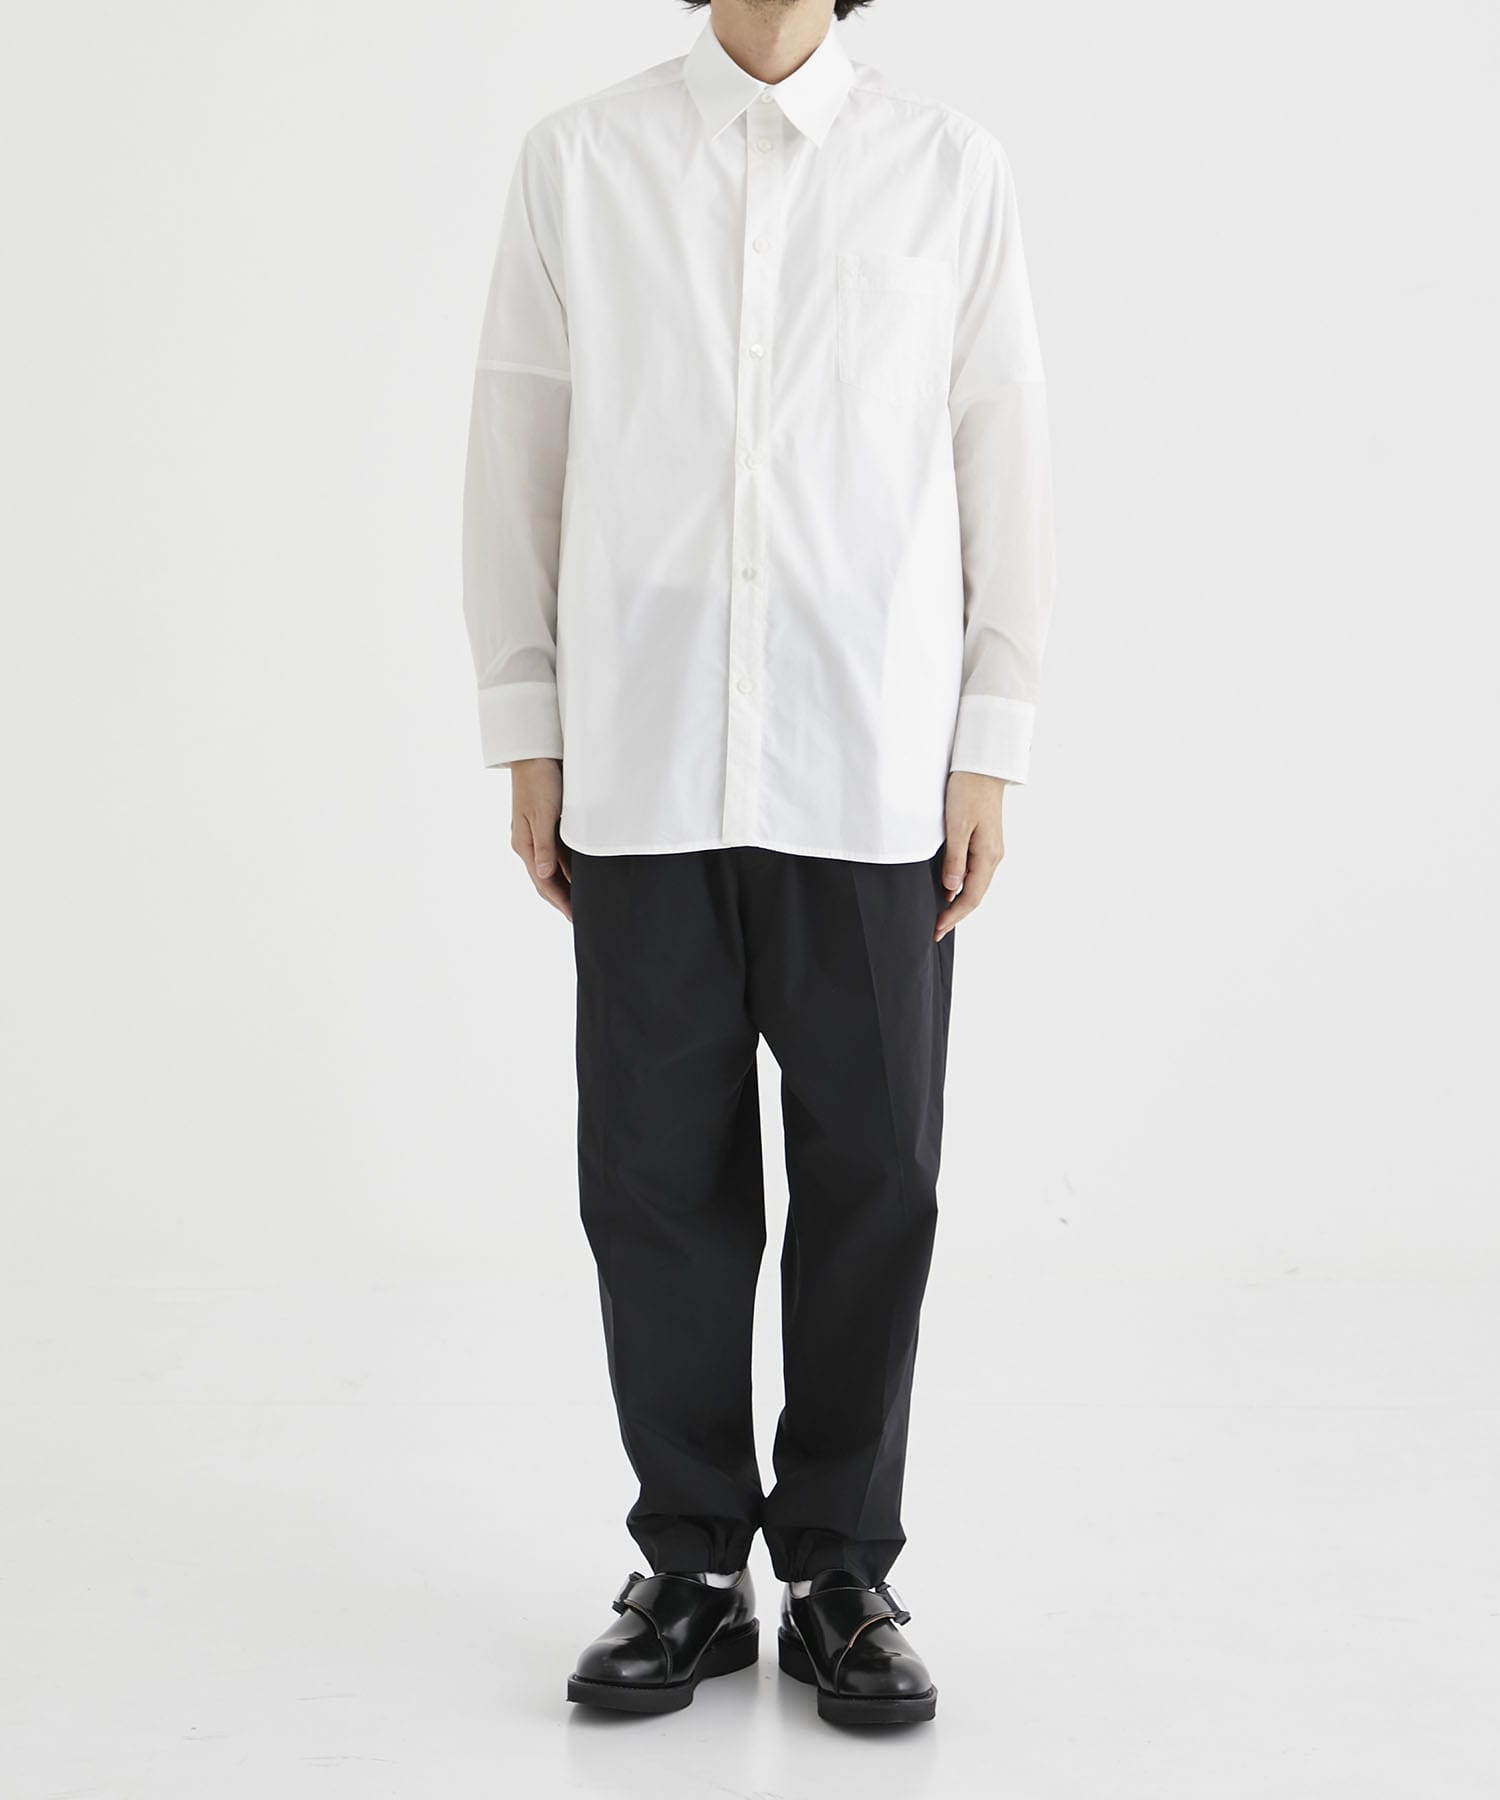 Sports Mixed Shirt (MID)(1 WHITE): th products: MEN｜THE TOKYO